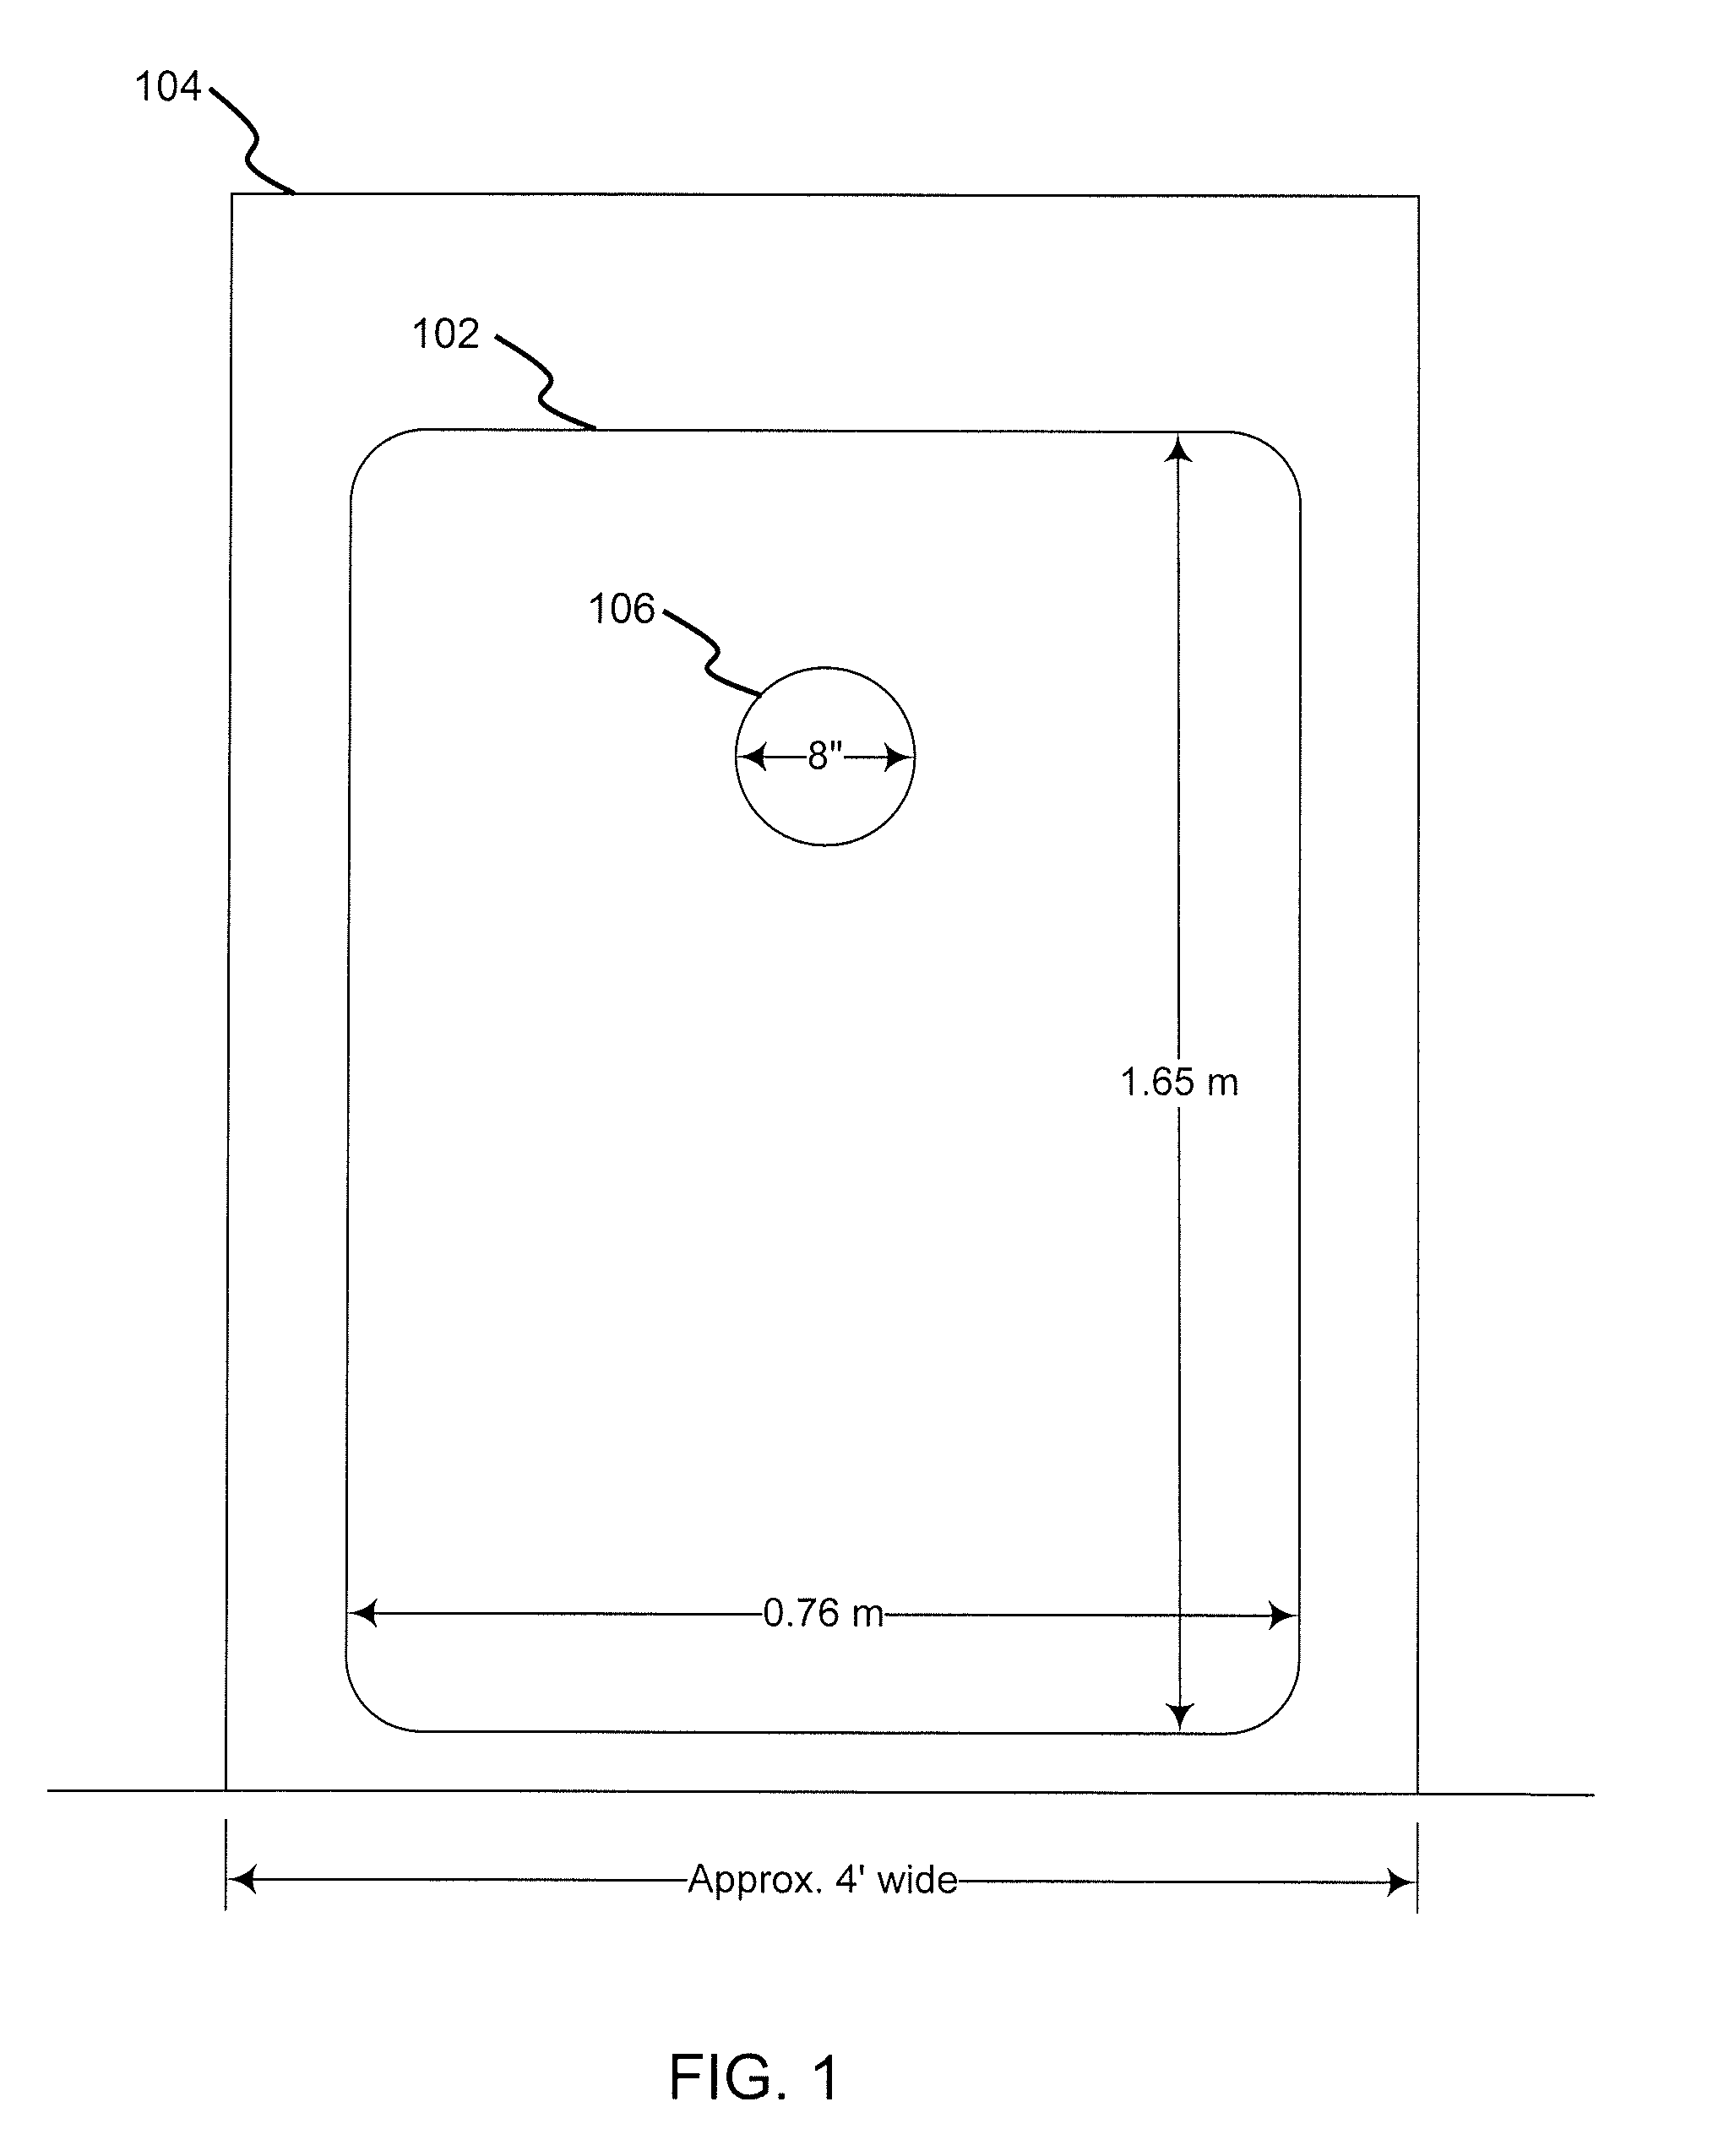 System and method for mitigating and directing an explosion aboard an aircraft